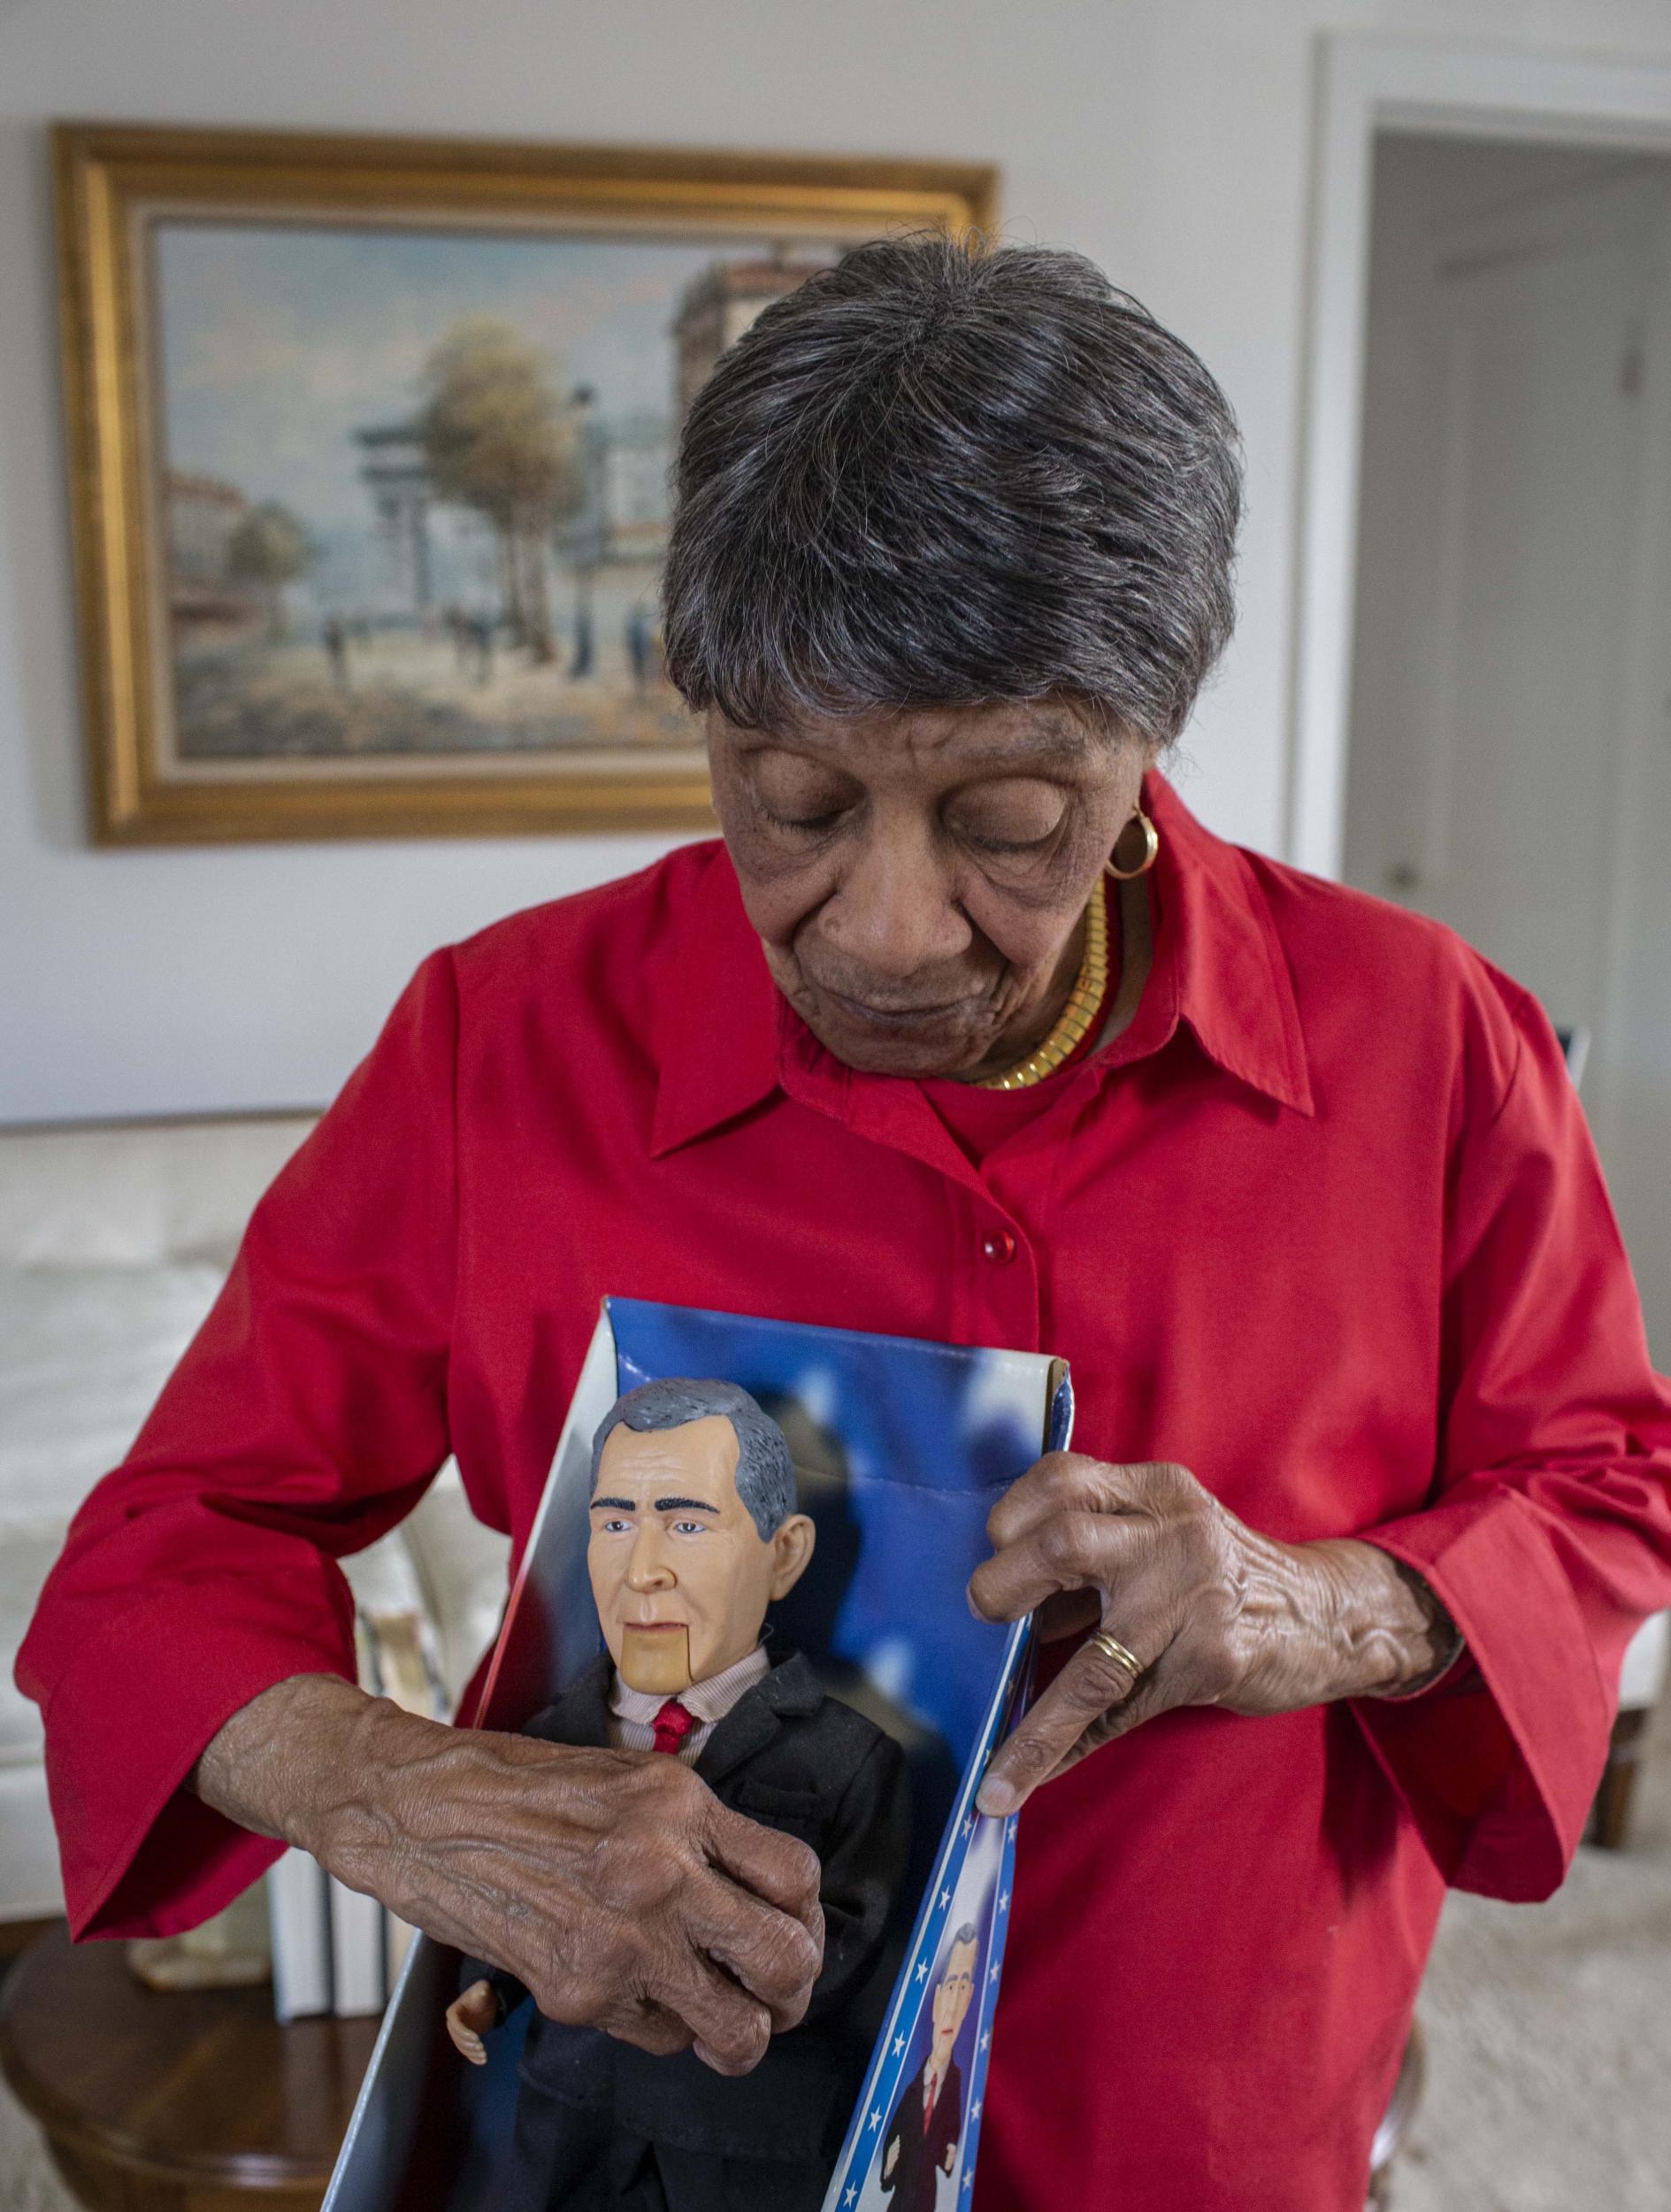 Louise Griffin, 99, a retired teacher and principal who has volunteered at the White House for 26 years, holds a singing caricature of George W Bush